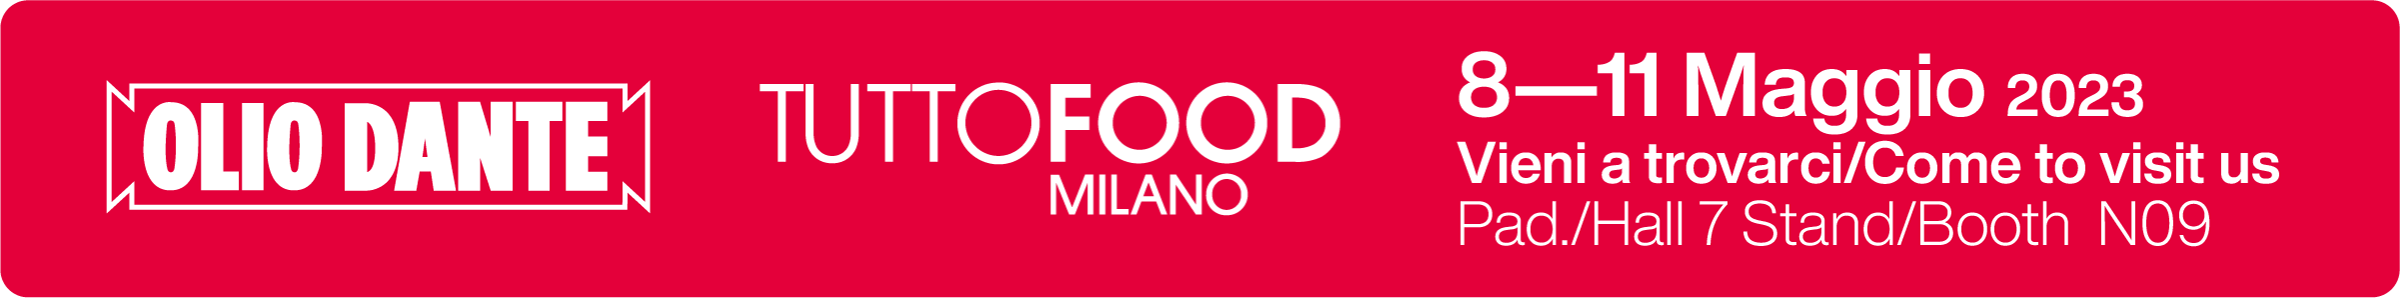 banner tuttofood 2023